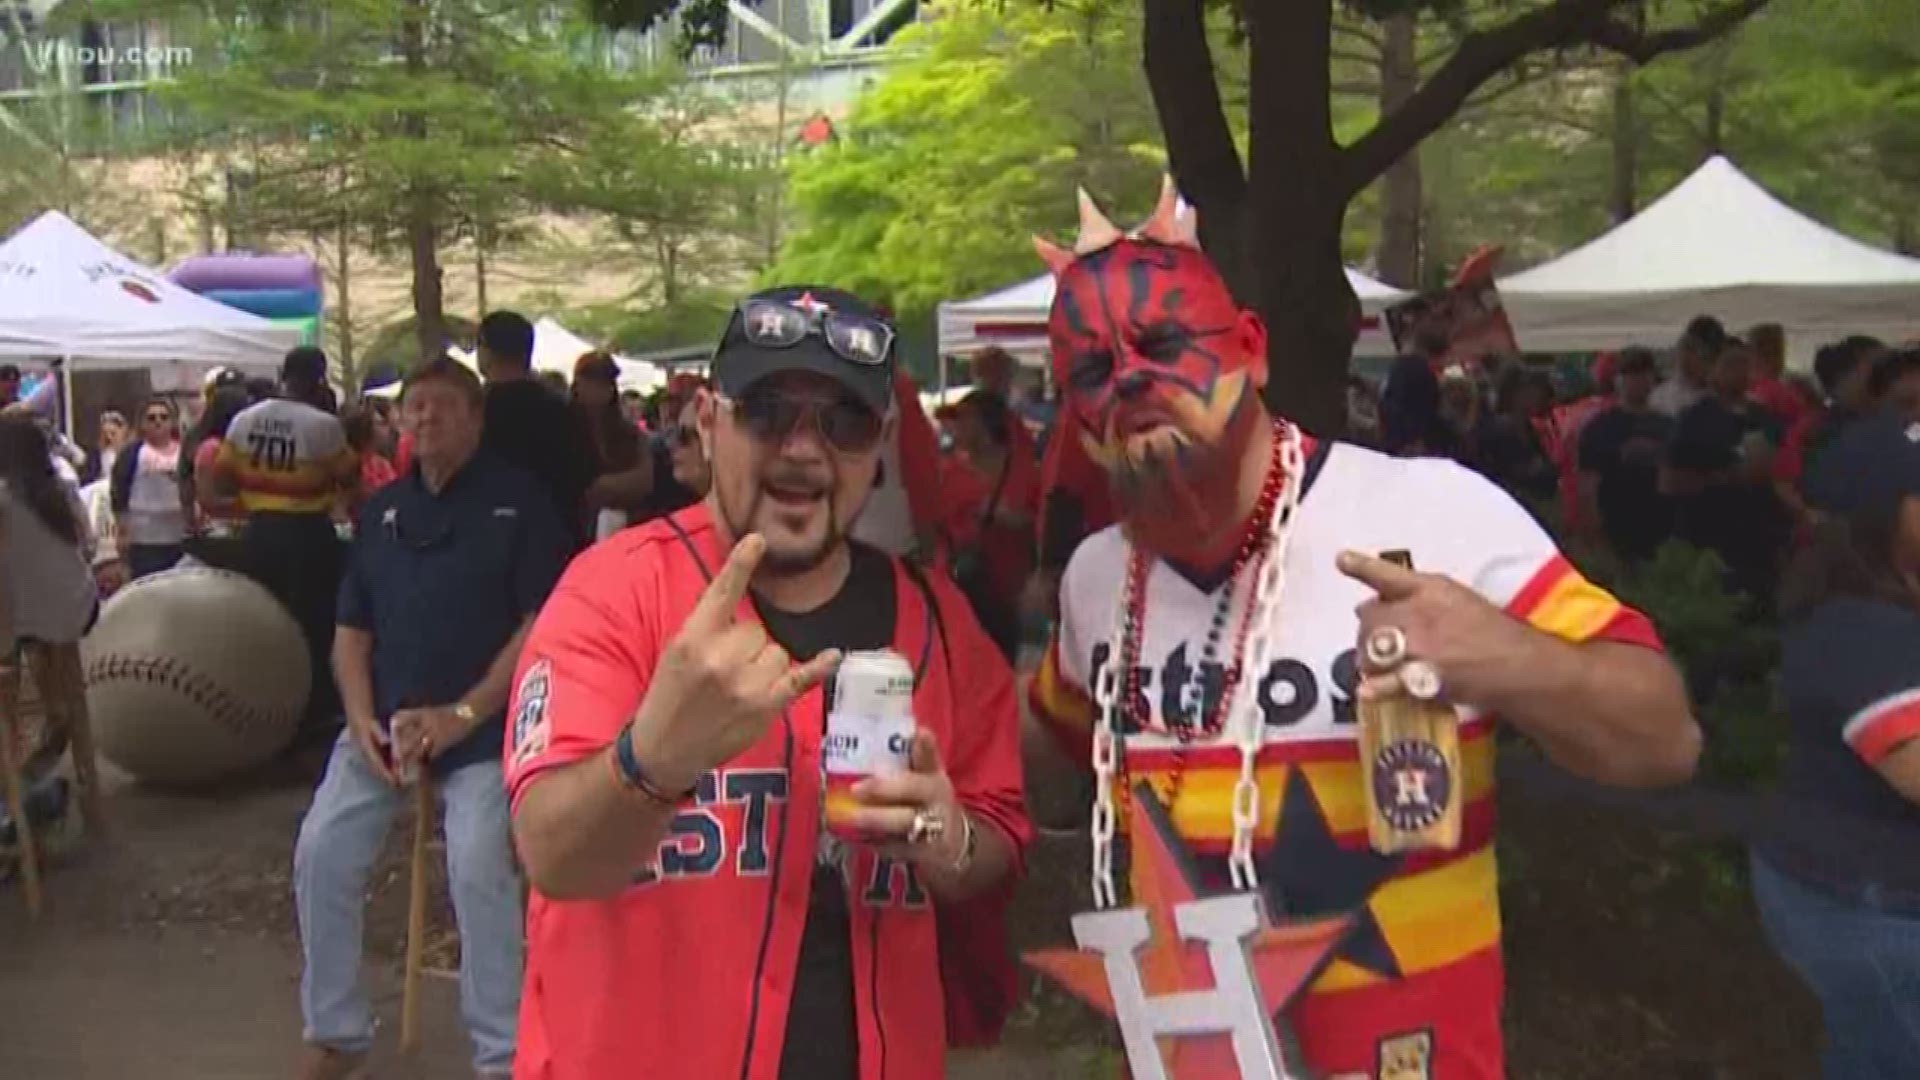 Houston Astros fans were out at Minute Maid in full force at Minute Maid Park for the team's home opener.